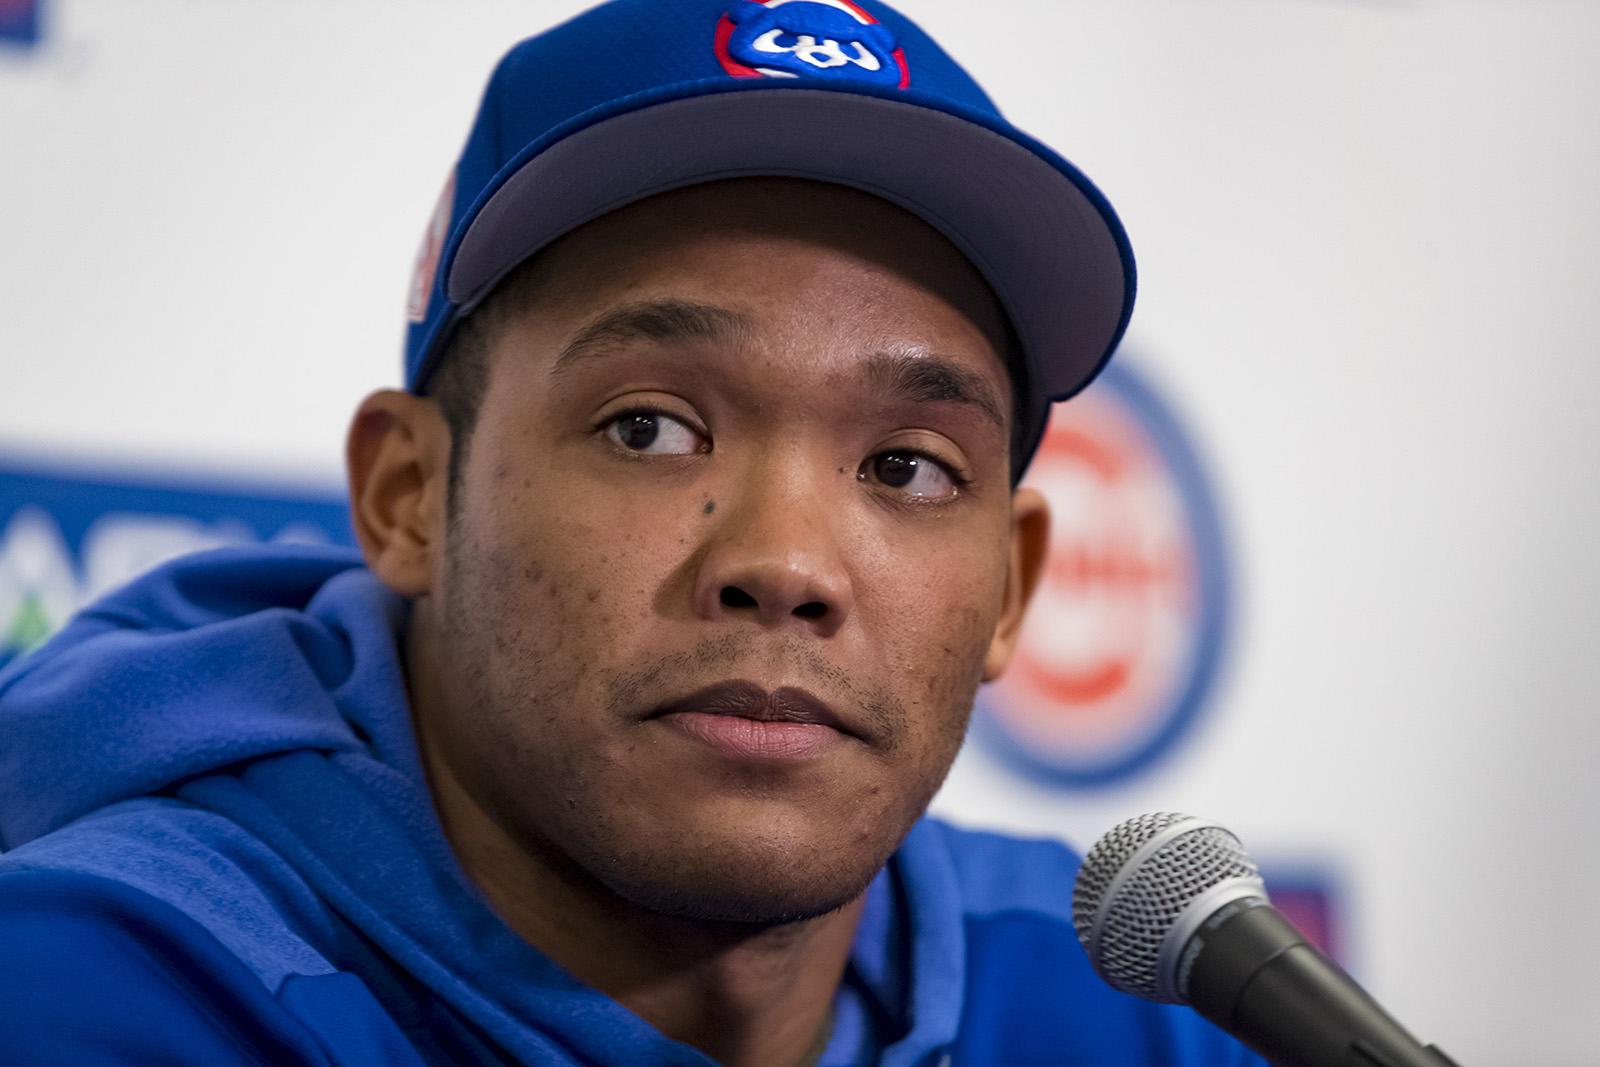 Chicago Cubs shortstop Addison Russell addresses the media about his suspension for domestic violence Friday, Feb. 15, 2019 during spring training in Mesa, Ariz. (Brian Cassella/Chicago Tribune/TNS)